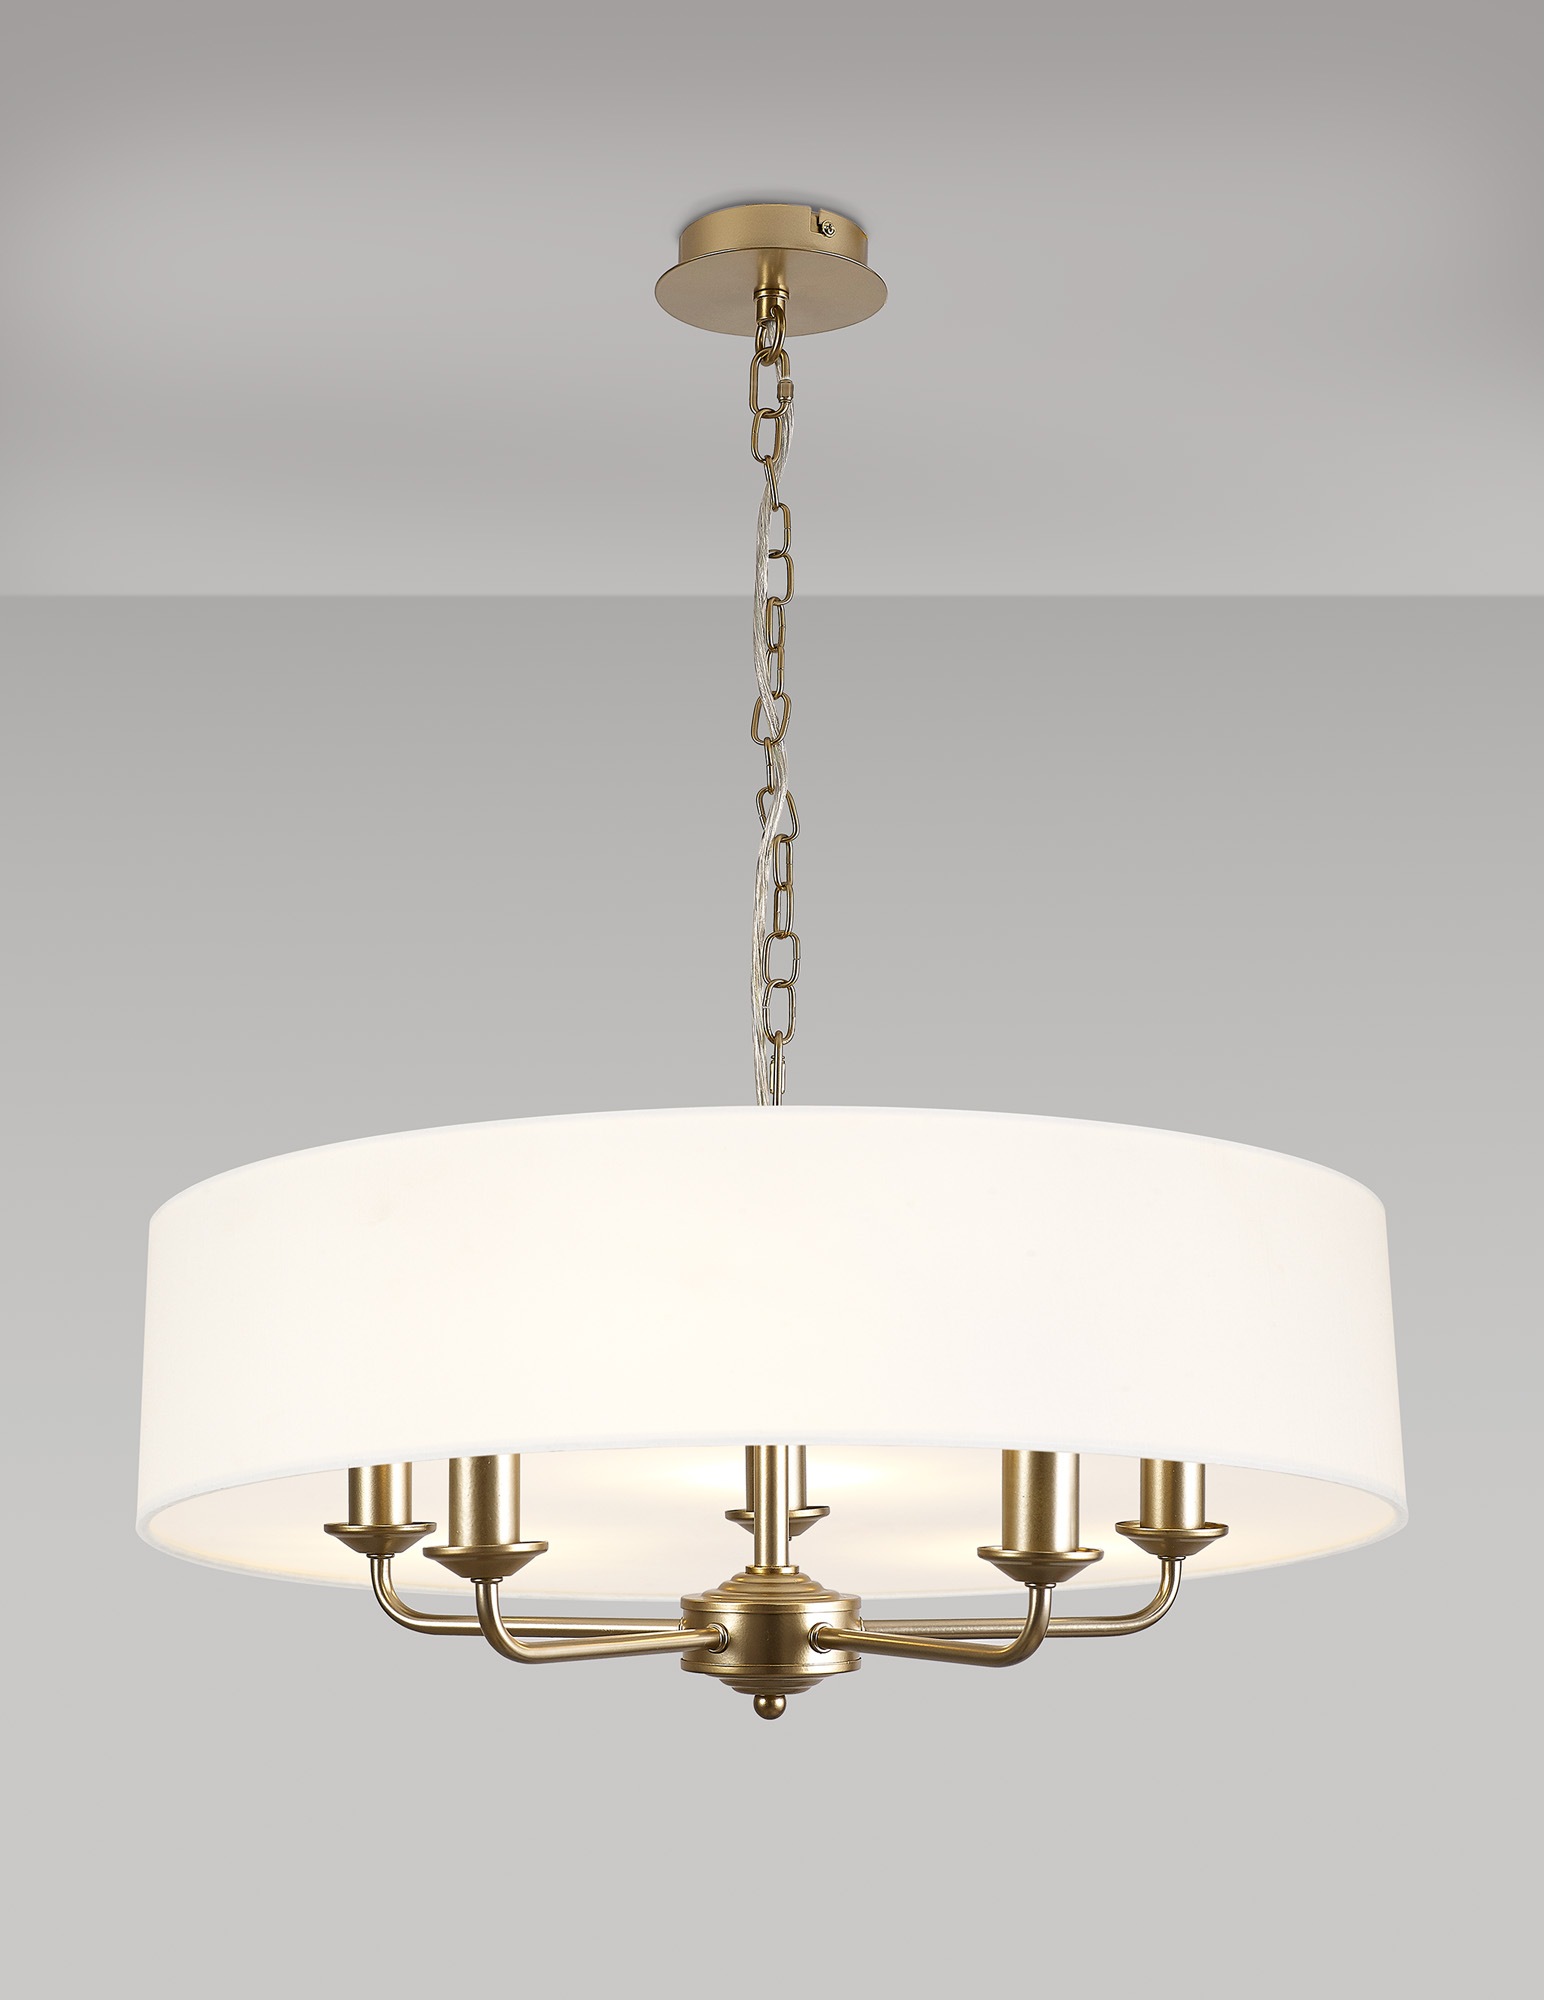 Banyan CG WH Ceiling Lights Deco Multi Arm Fittings